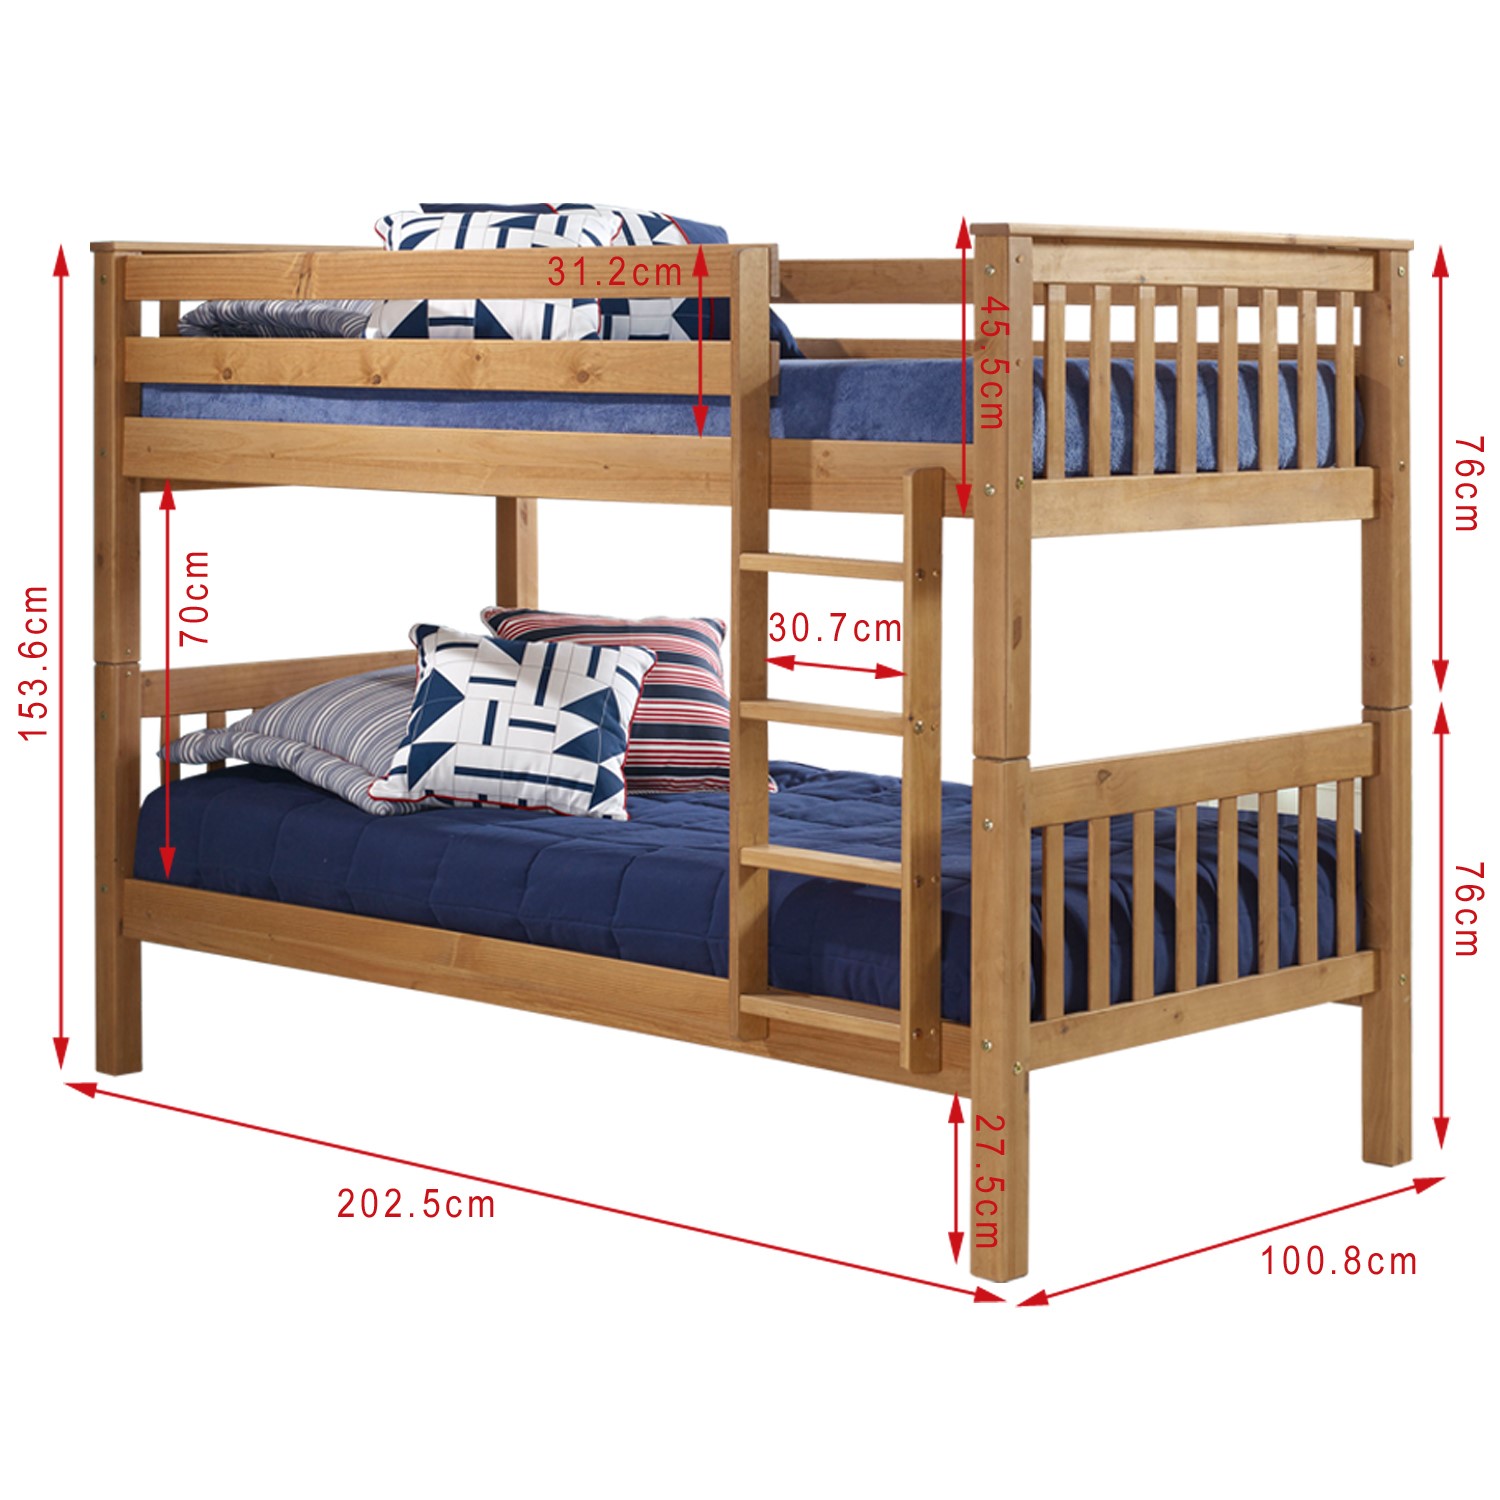 Oxford Pine Single Bunk Bed Ladder, Ladder Dimensions For Bunk Bed